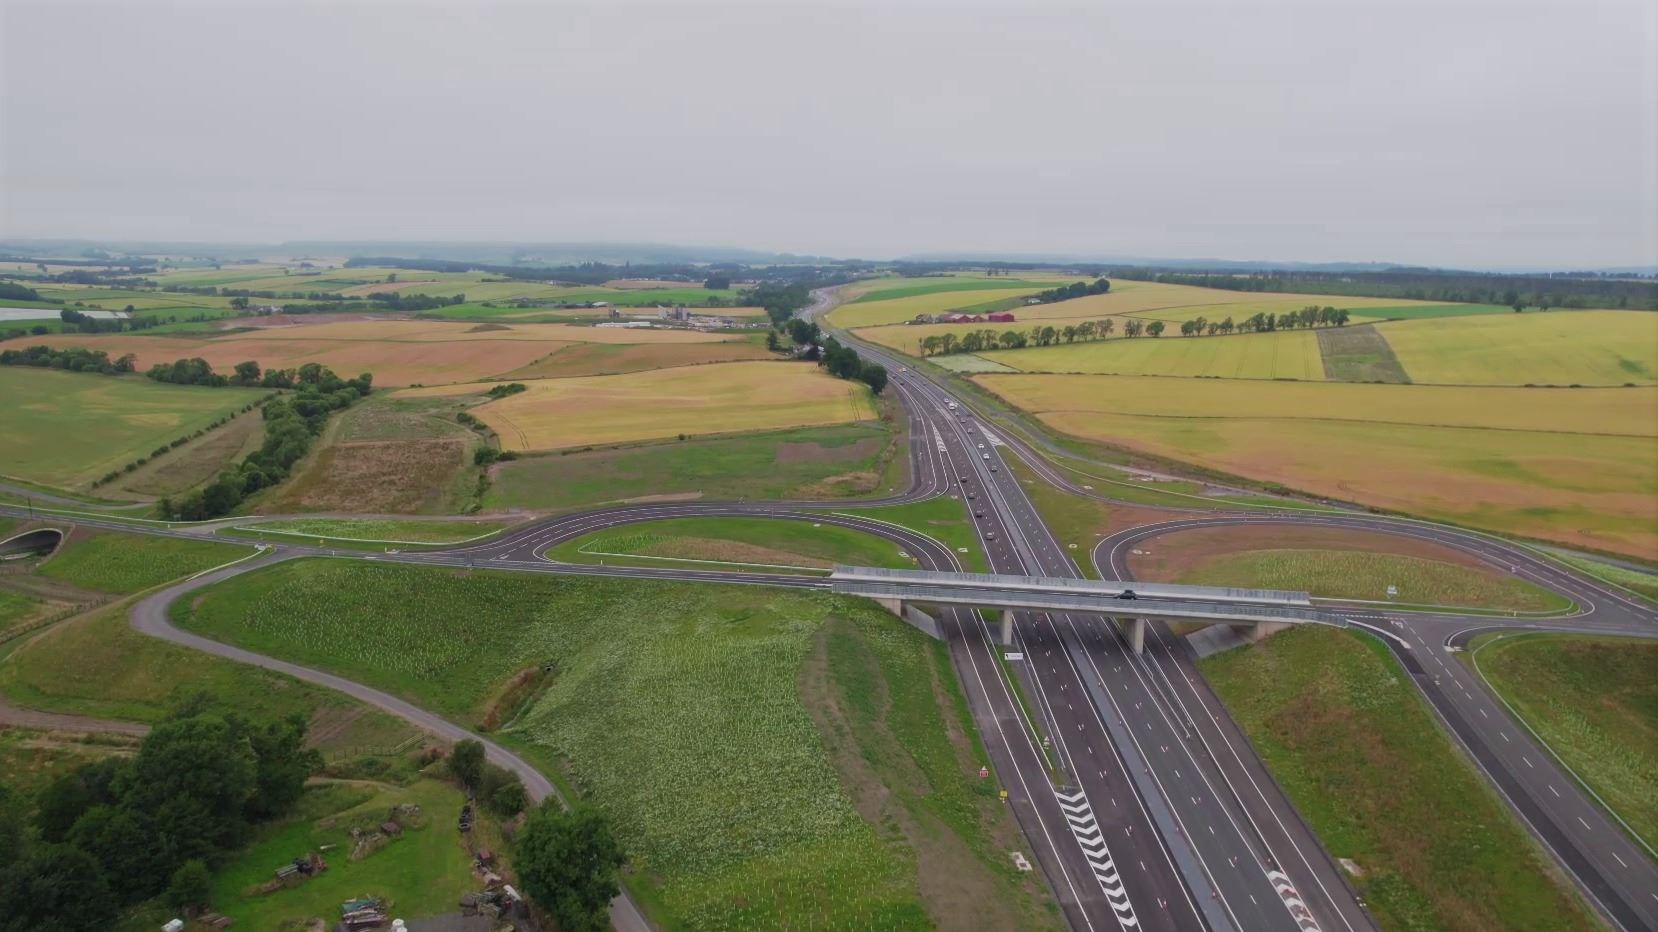 Opening to traffic - the new A9 dualling from Luncarty to Pass of Birnam showing the Stanley Tullybelton junction.